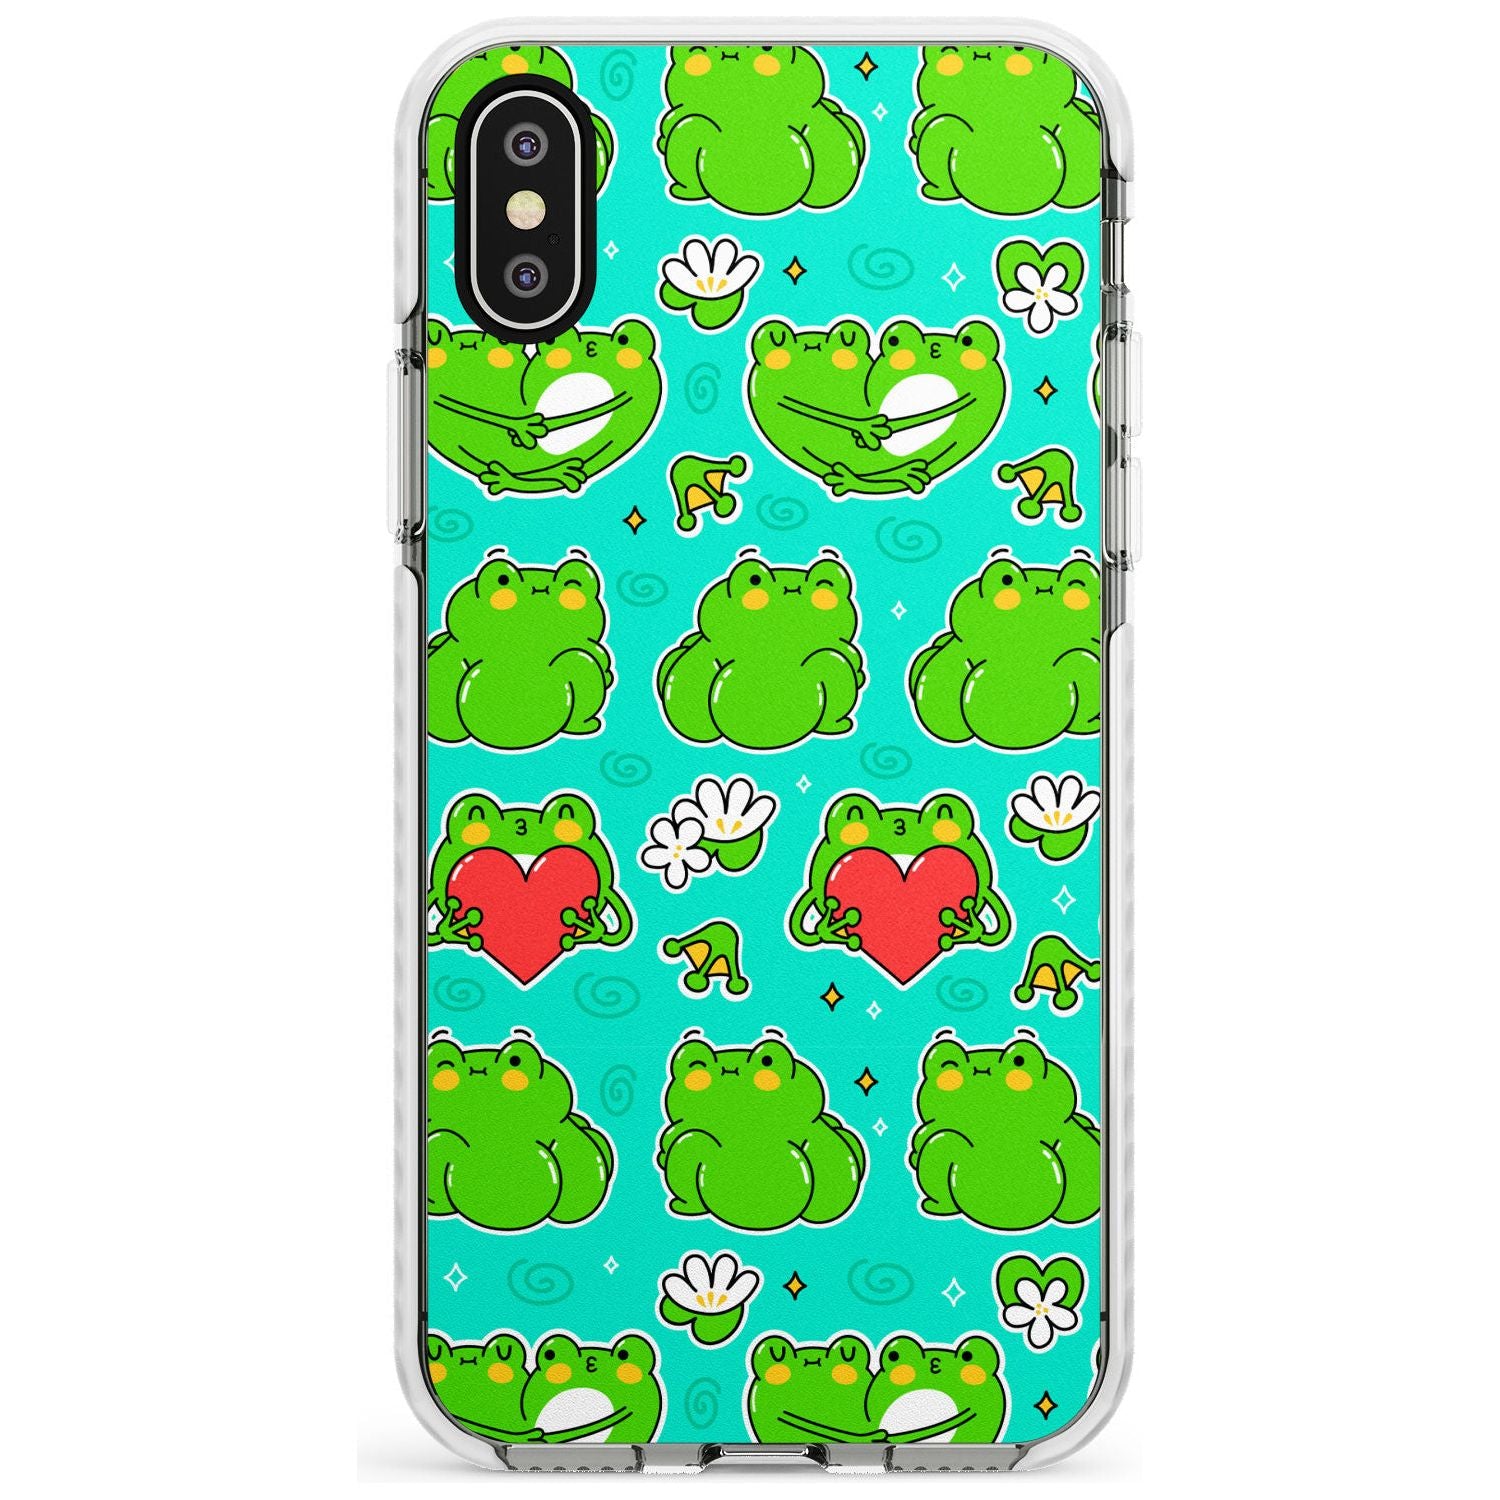 Frog Booty Kawaii Pattern Impact Phone Case for iPhone X XS Max XR